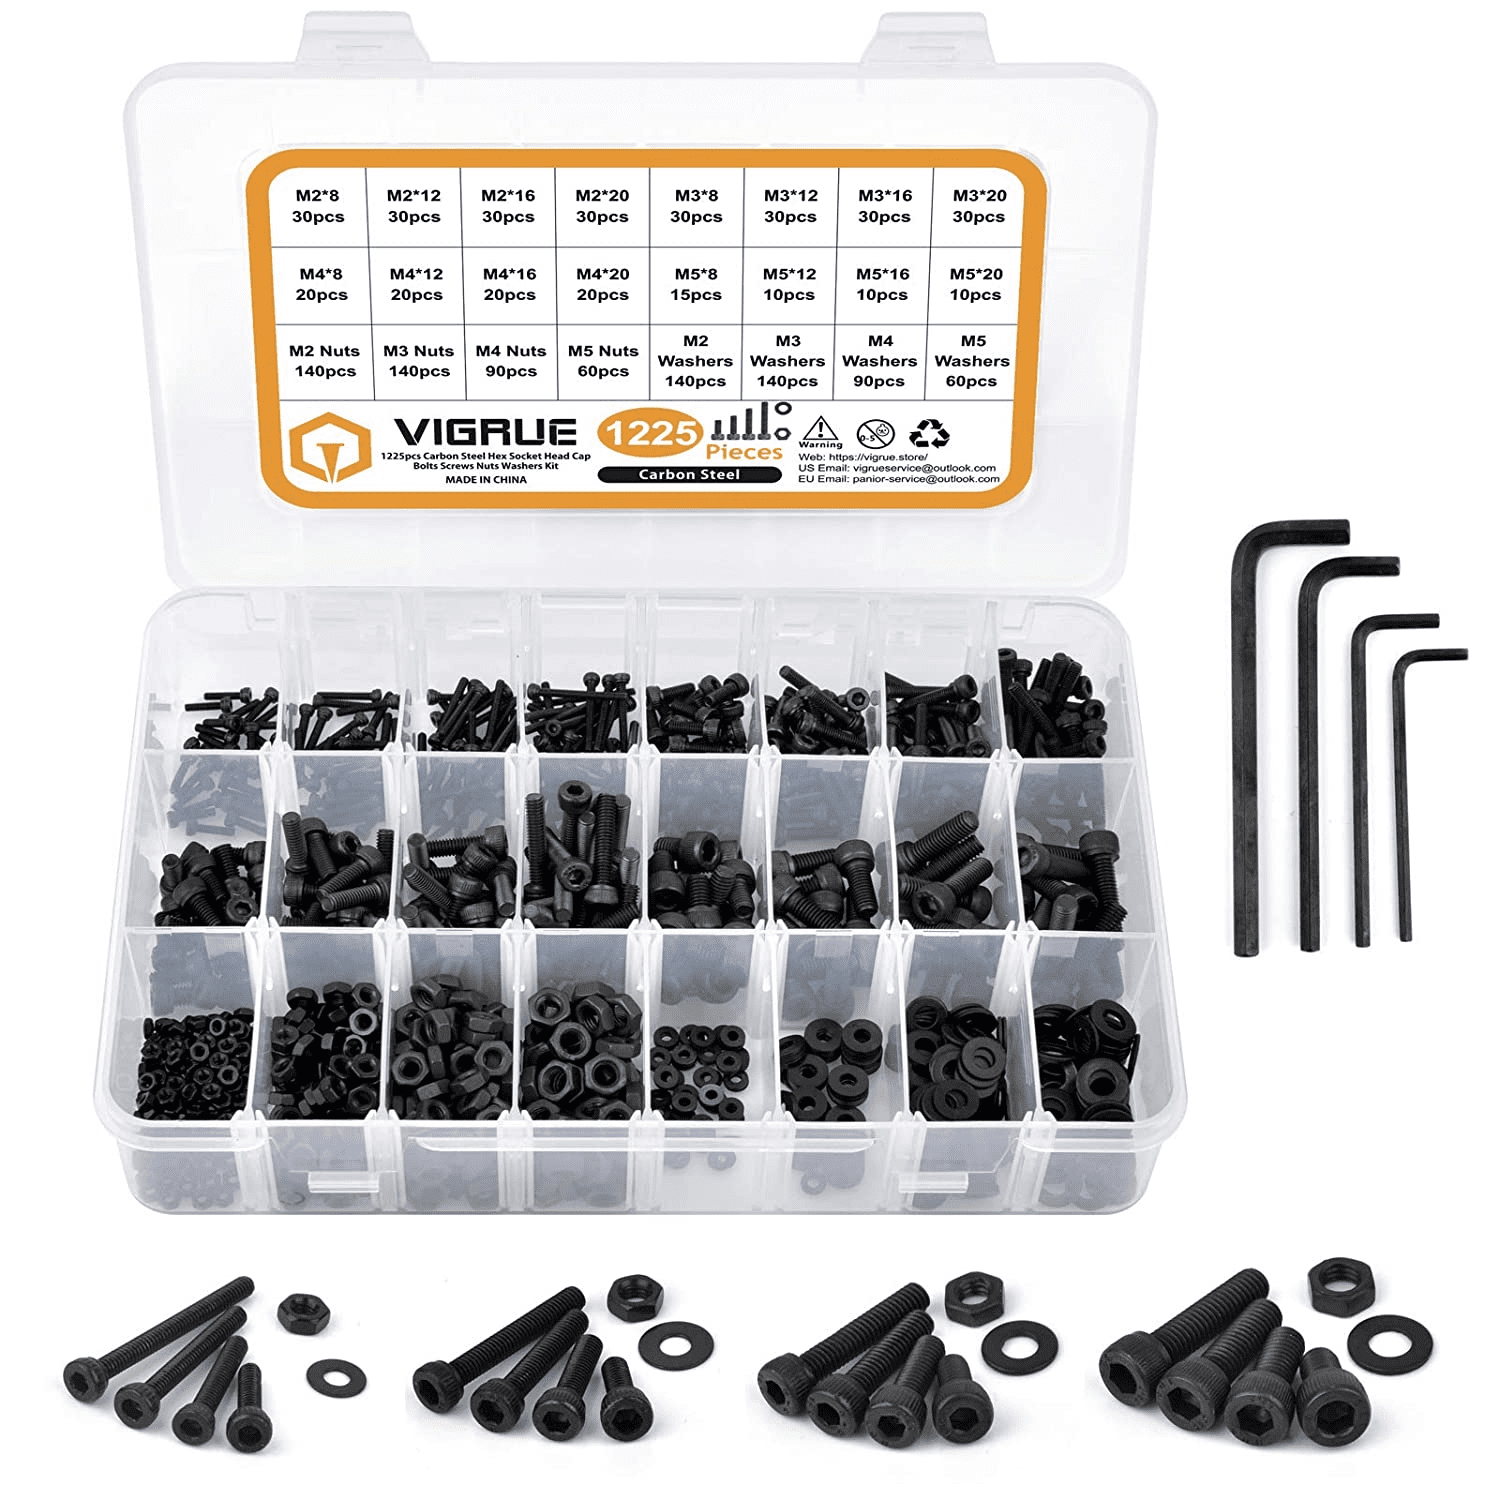 Black M3 Alloy Steel Hex Socket Head Cap Screws Nuts Assortment Kit 310 Pcs Precise Metric Bolts and Nuts Set with Beautiful Assortment Tool Box for 3D Printed Project Allen Wrench Drive